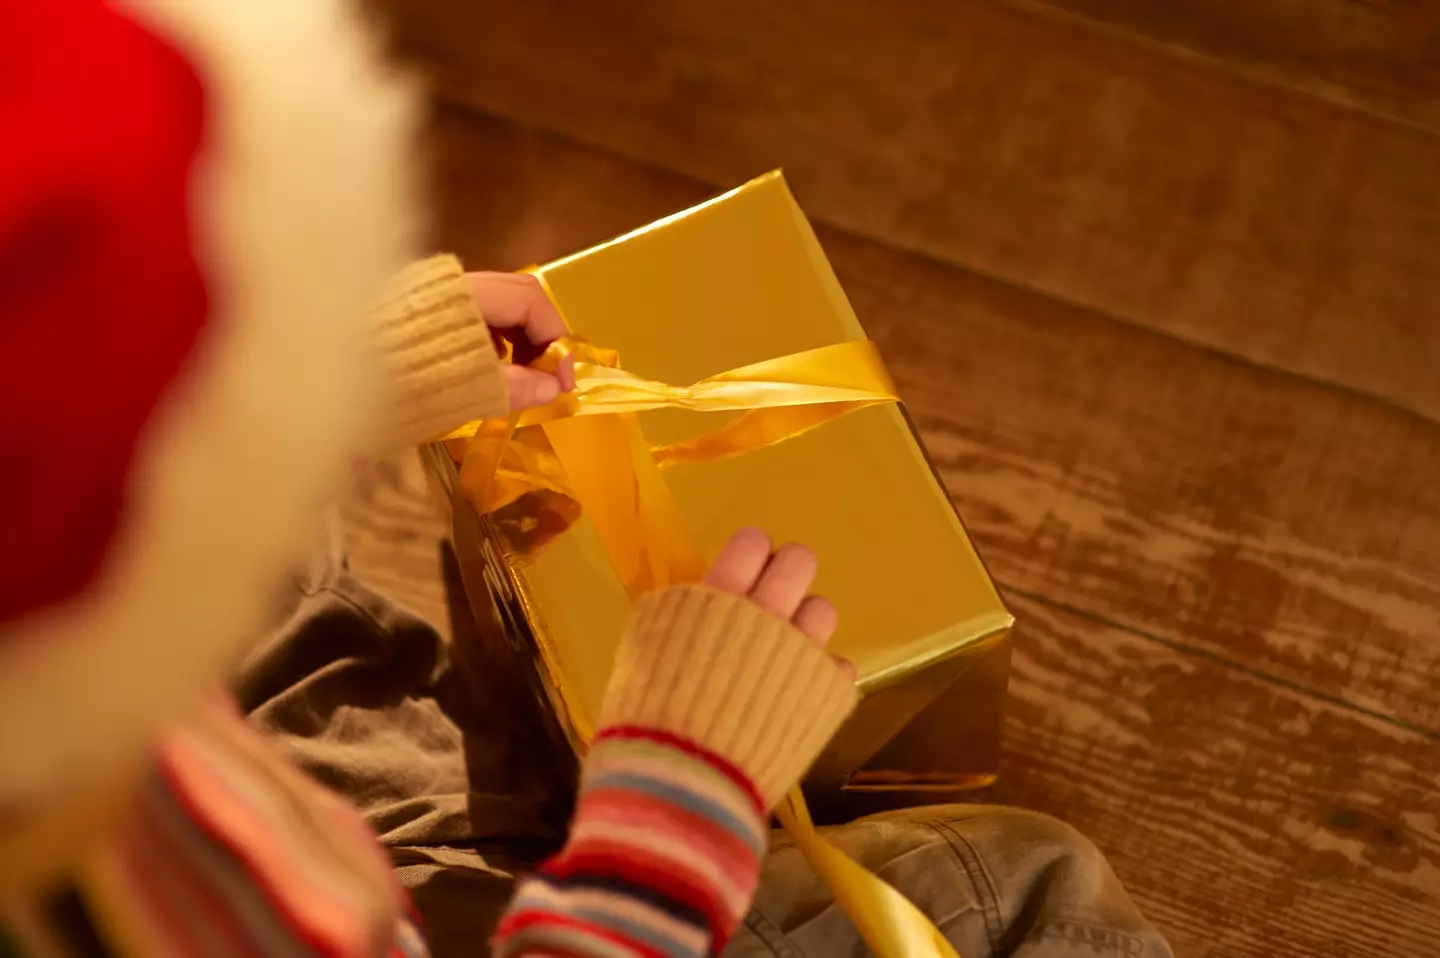 The cost of living crisis means lots of people can't afford to buy presents this year.